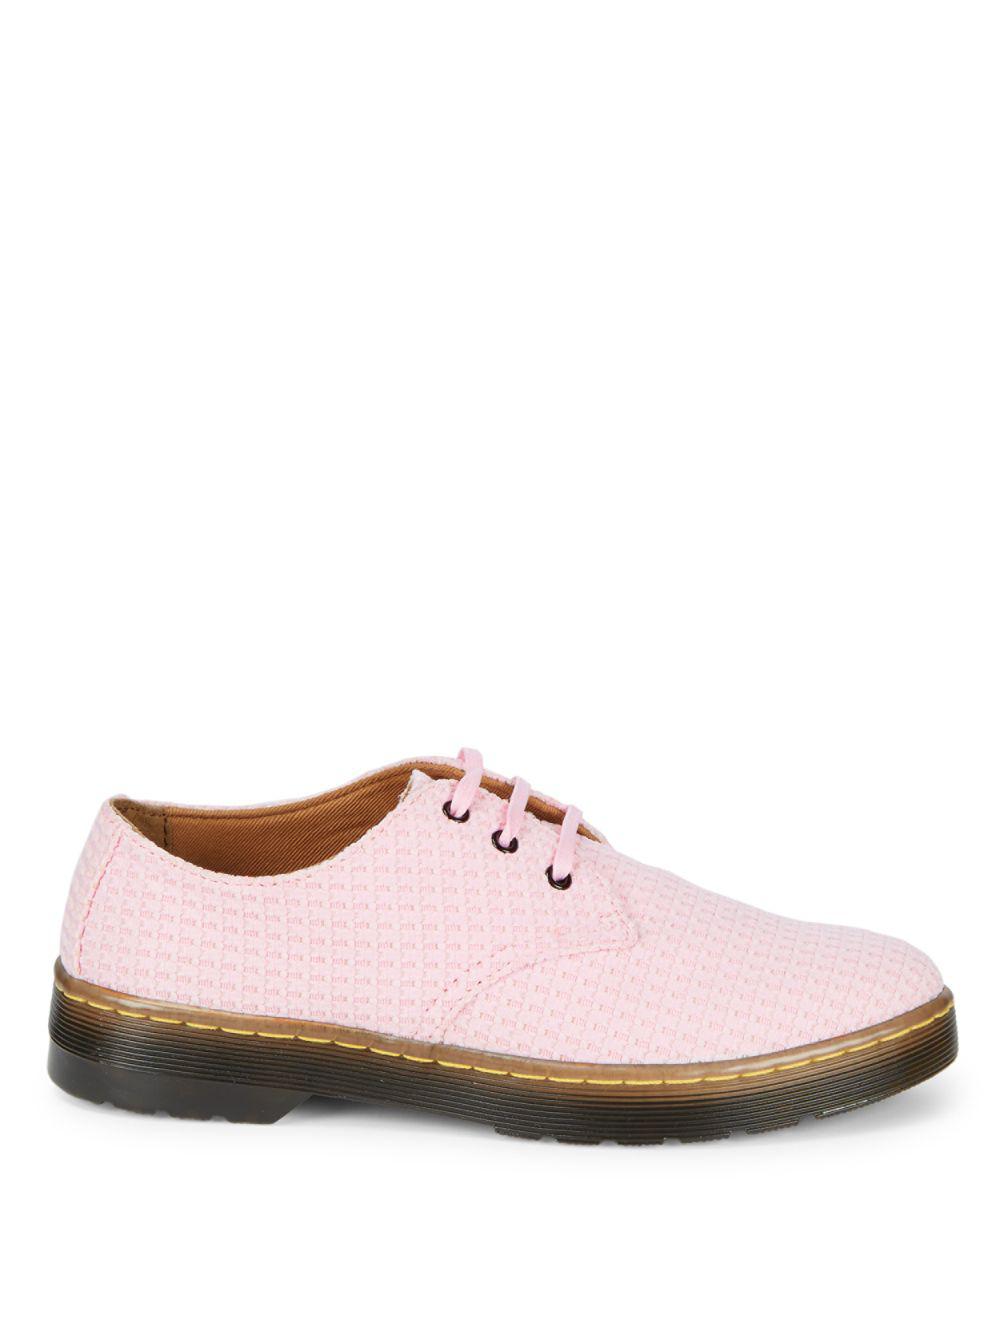 Dr. Martens Gizelle Lace-up Shoes in Pink | Lyst